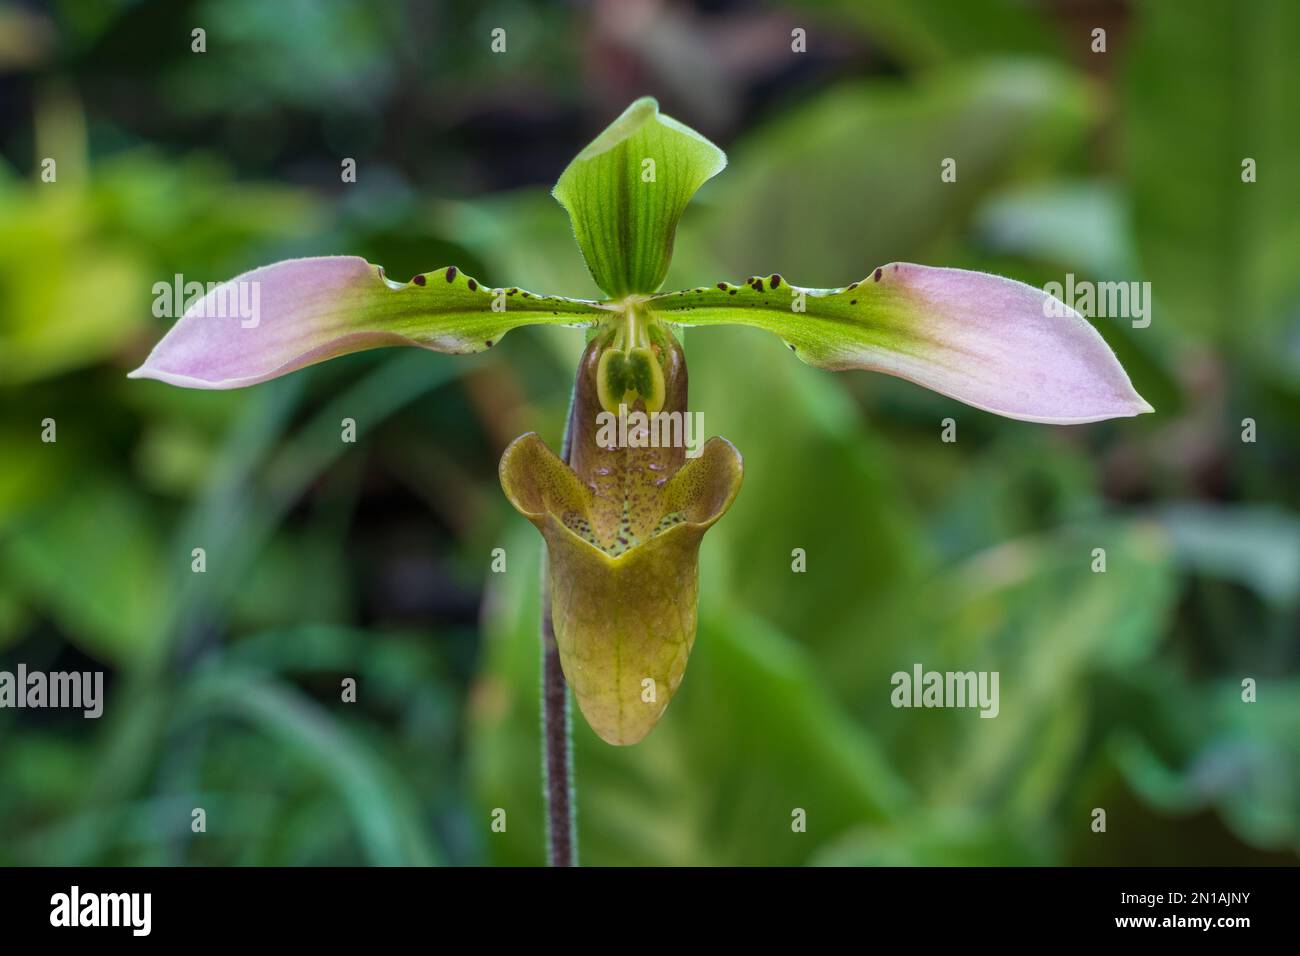 Closeup view of green, purple pink and brown flower of lady slipper orchid species paphiopedilum appletonianum blooming outdoors on natural background Stock Photo